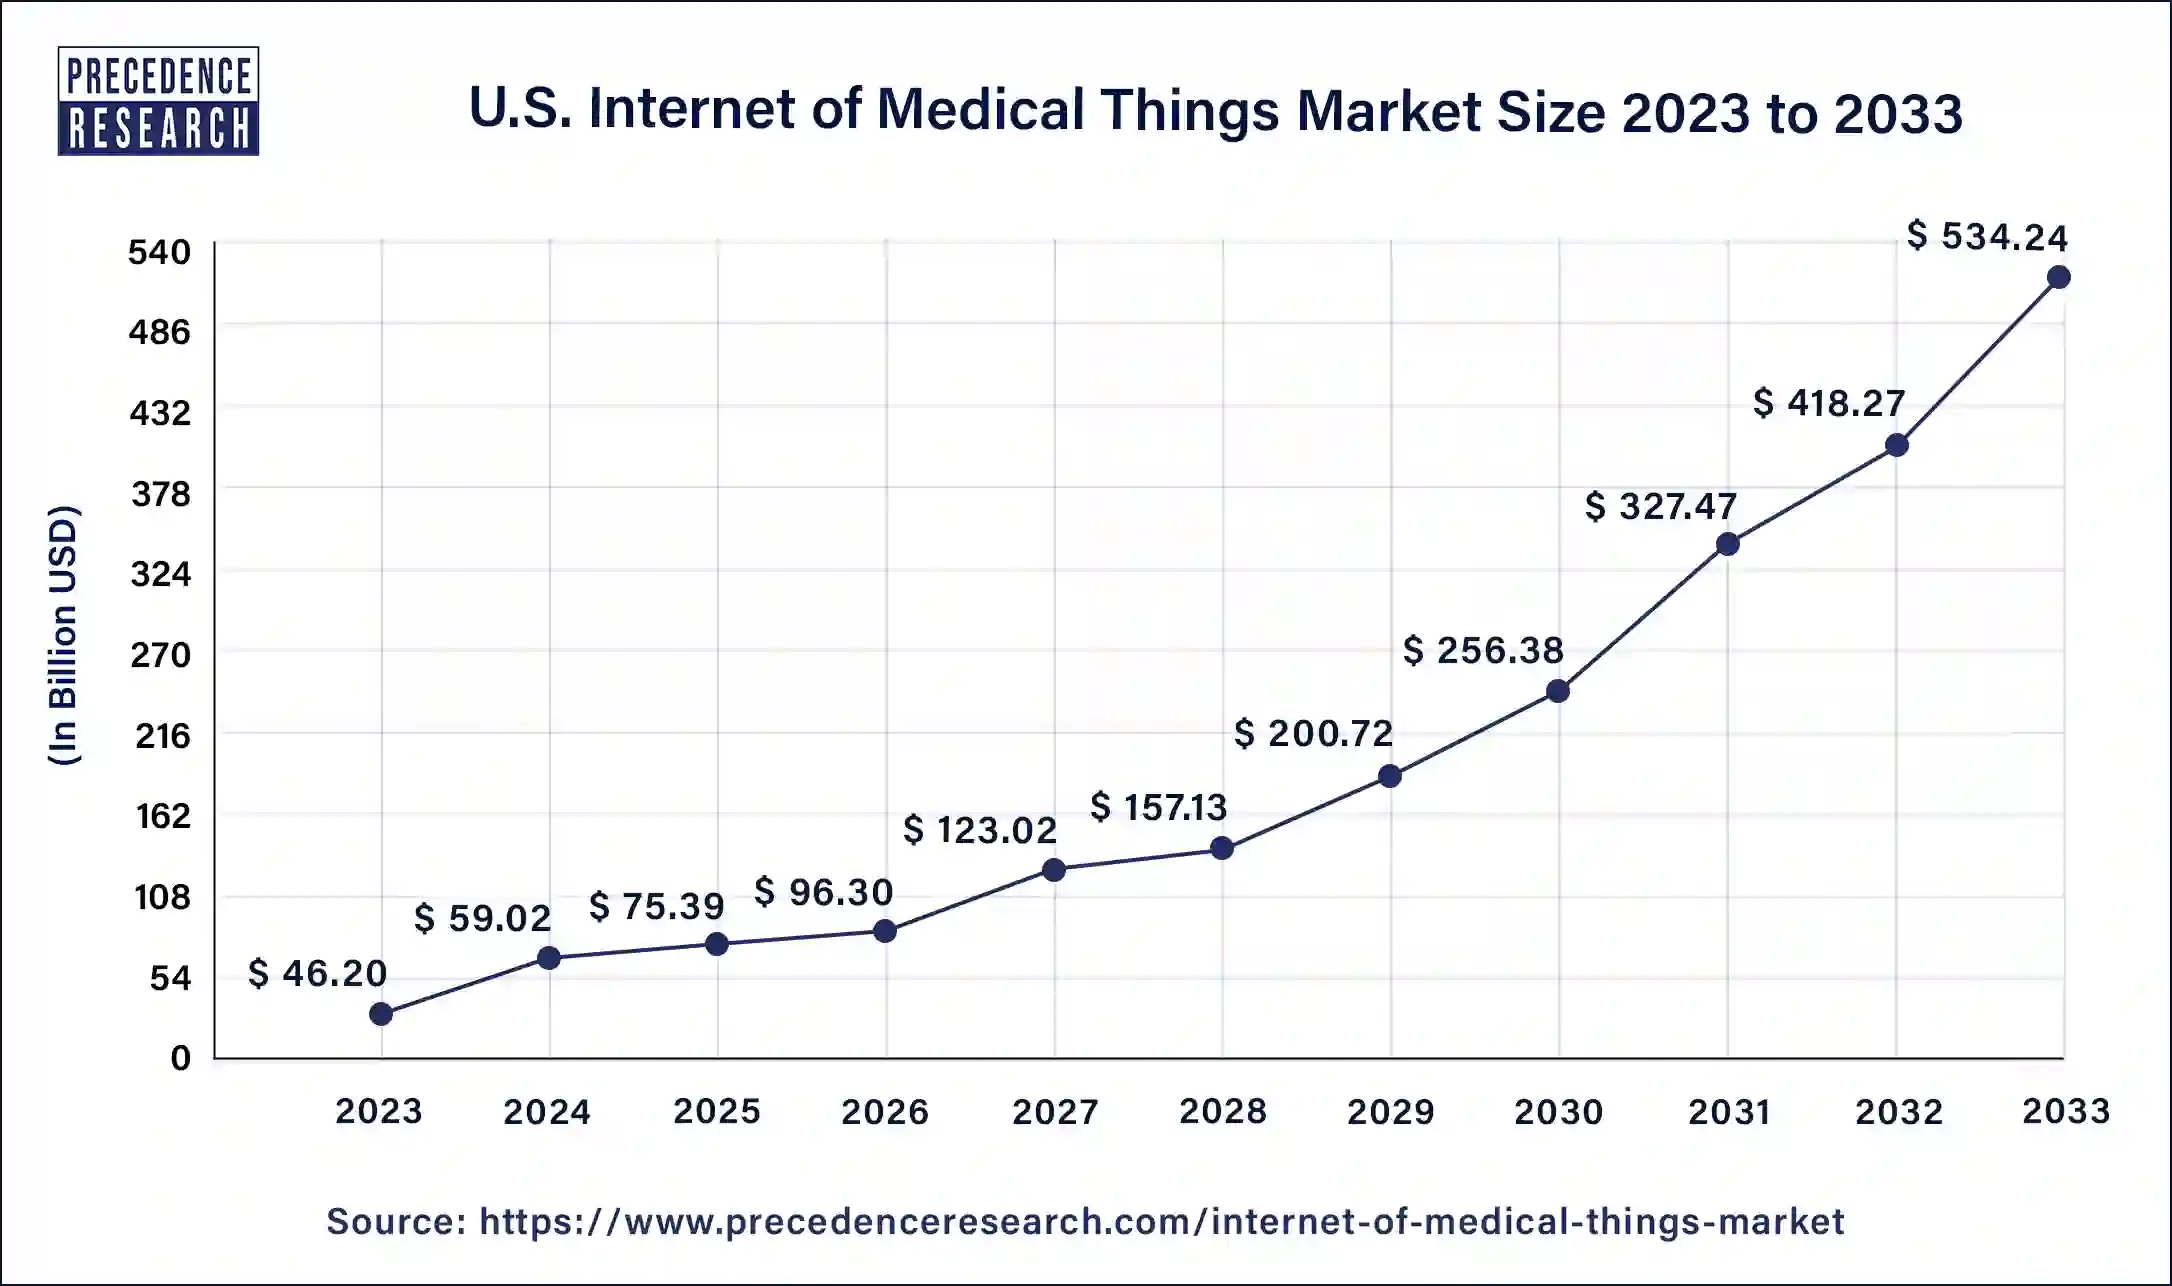 U.S. Internet of Medical Things Market Size 2024 to 2033